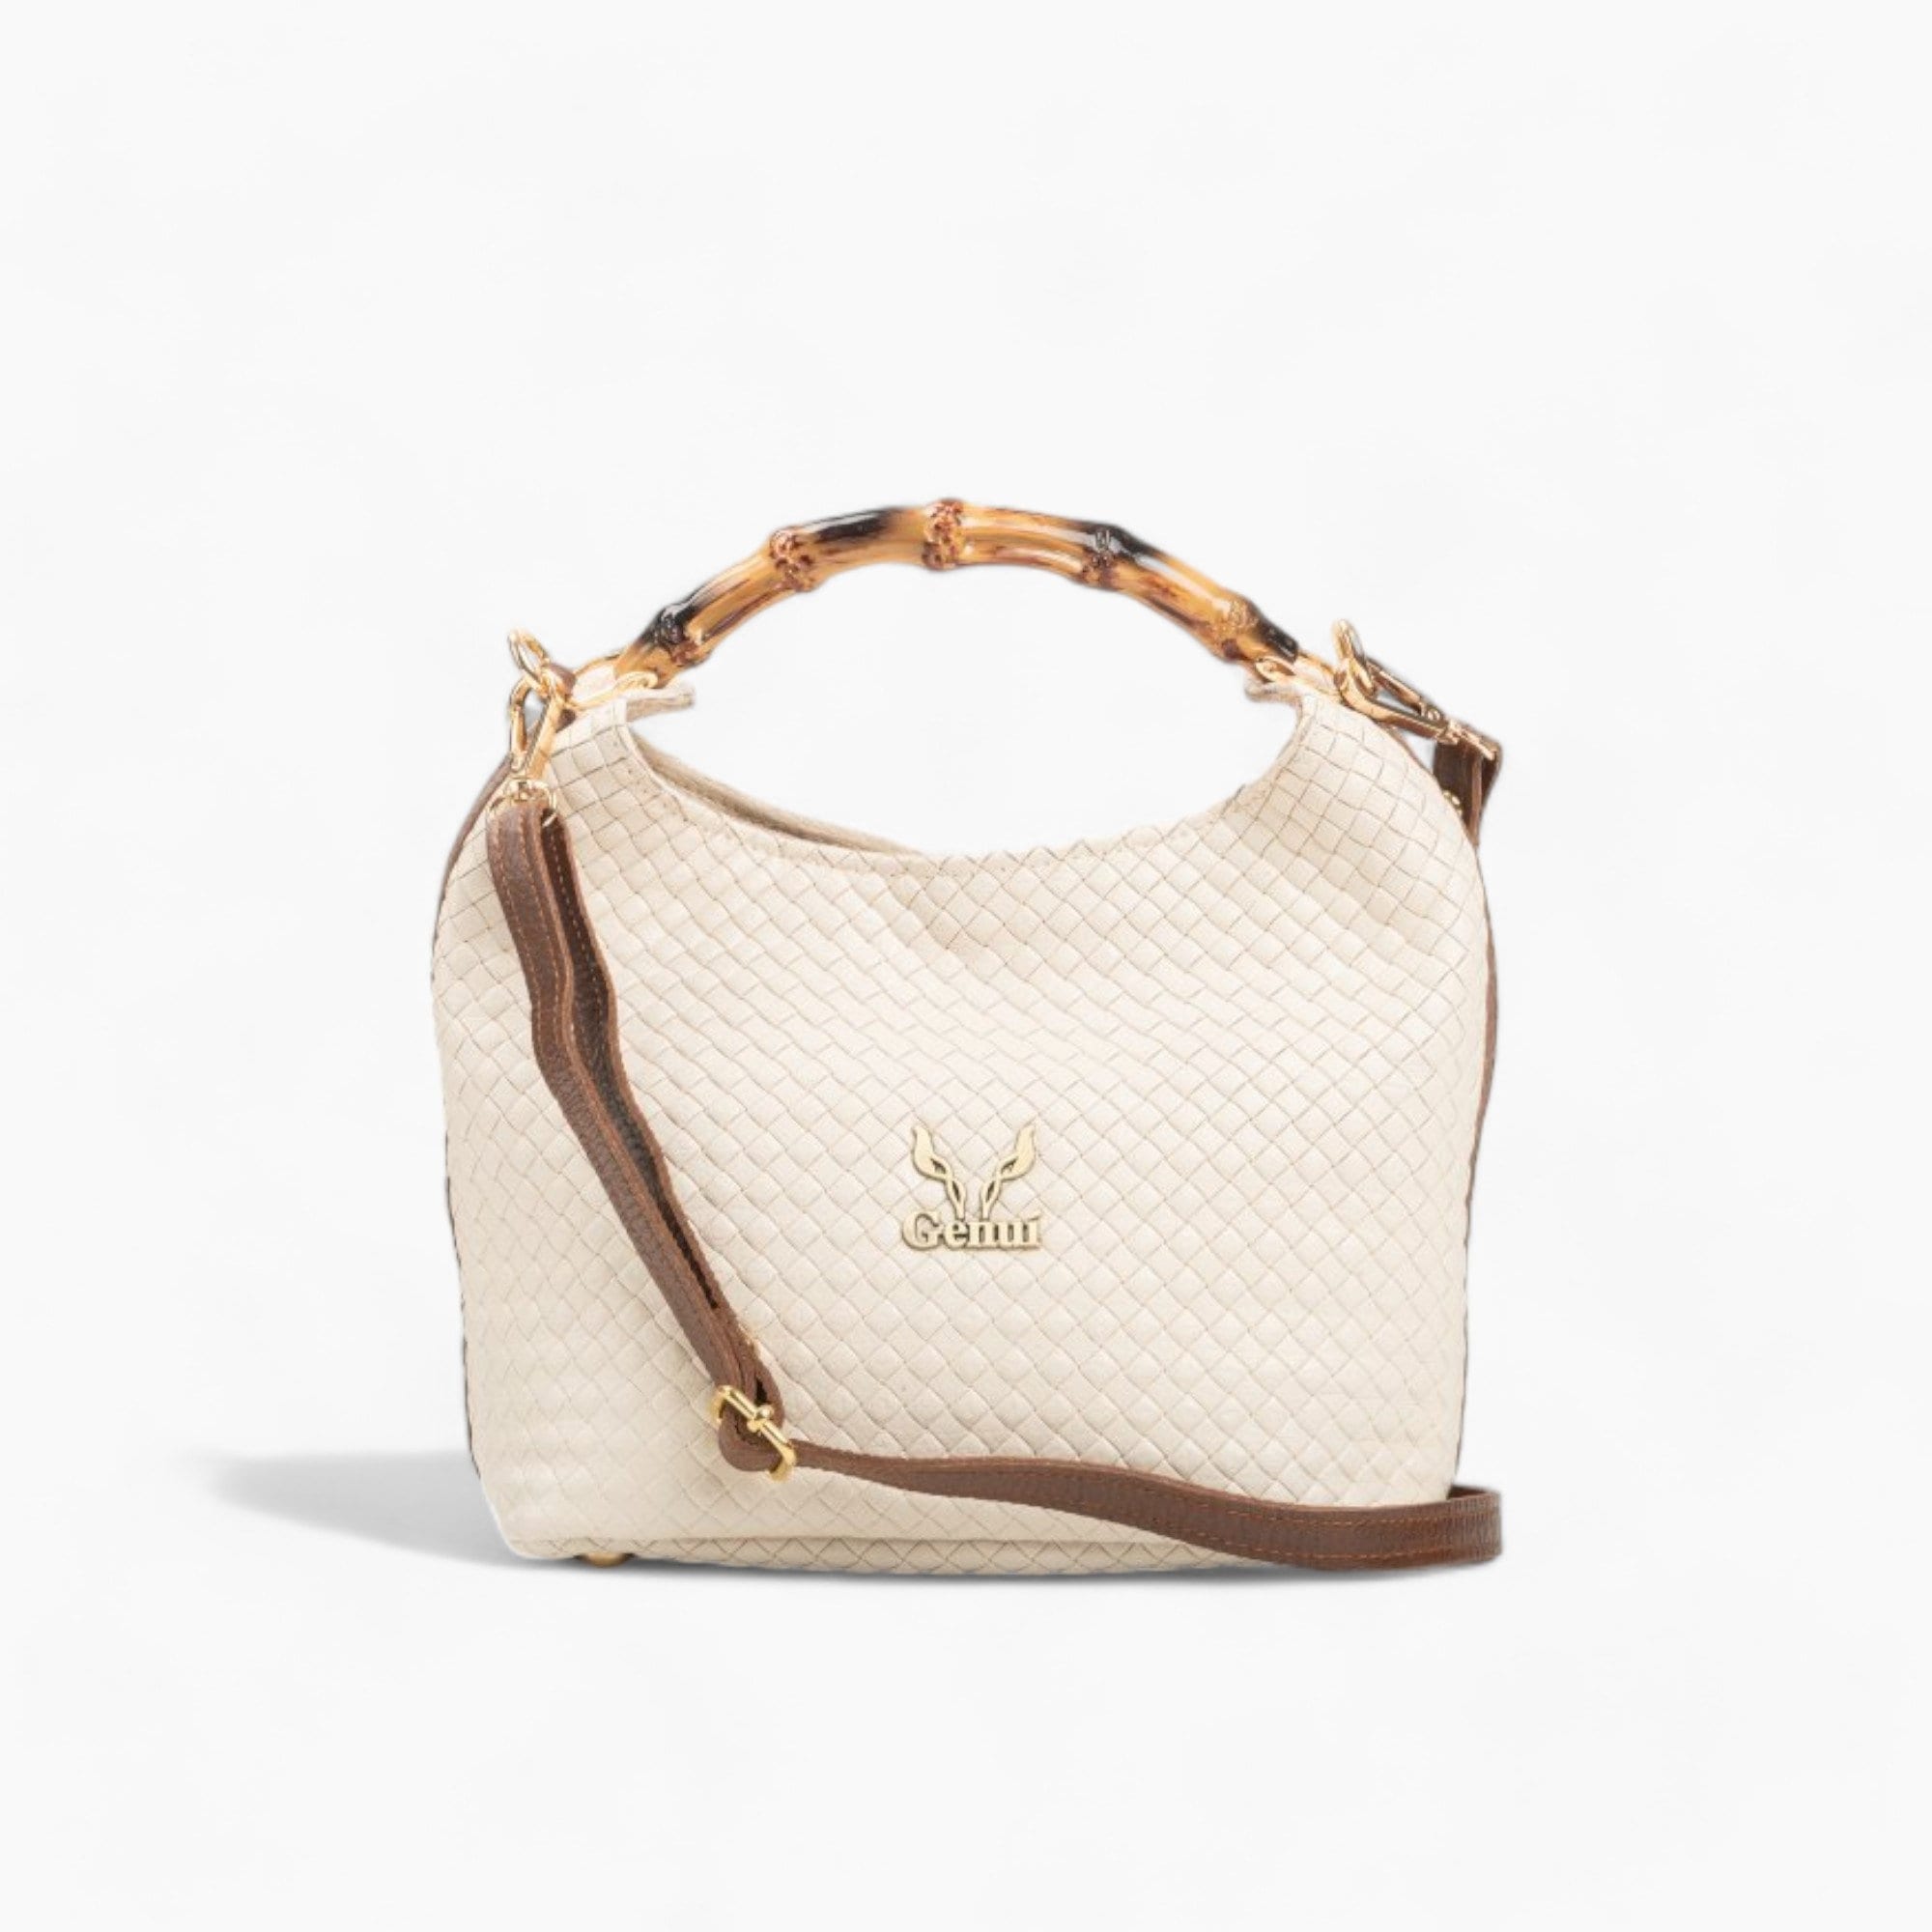 Leather bag with a detachable strap in beige color